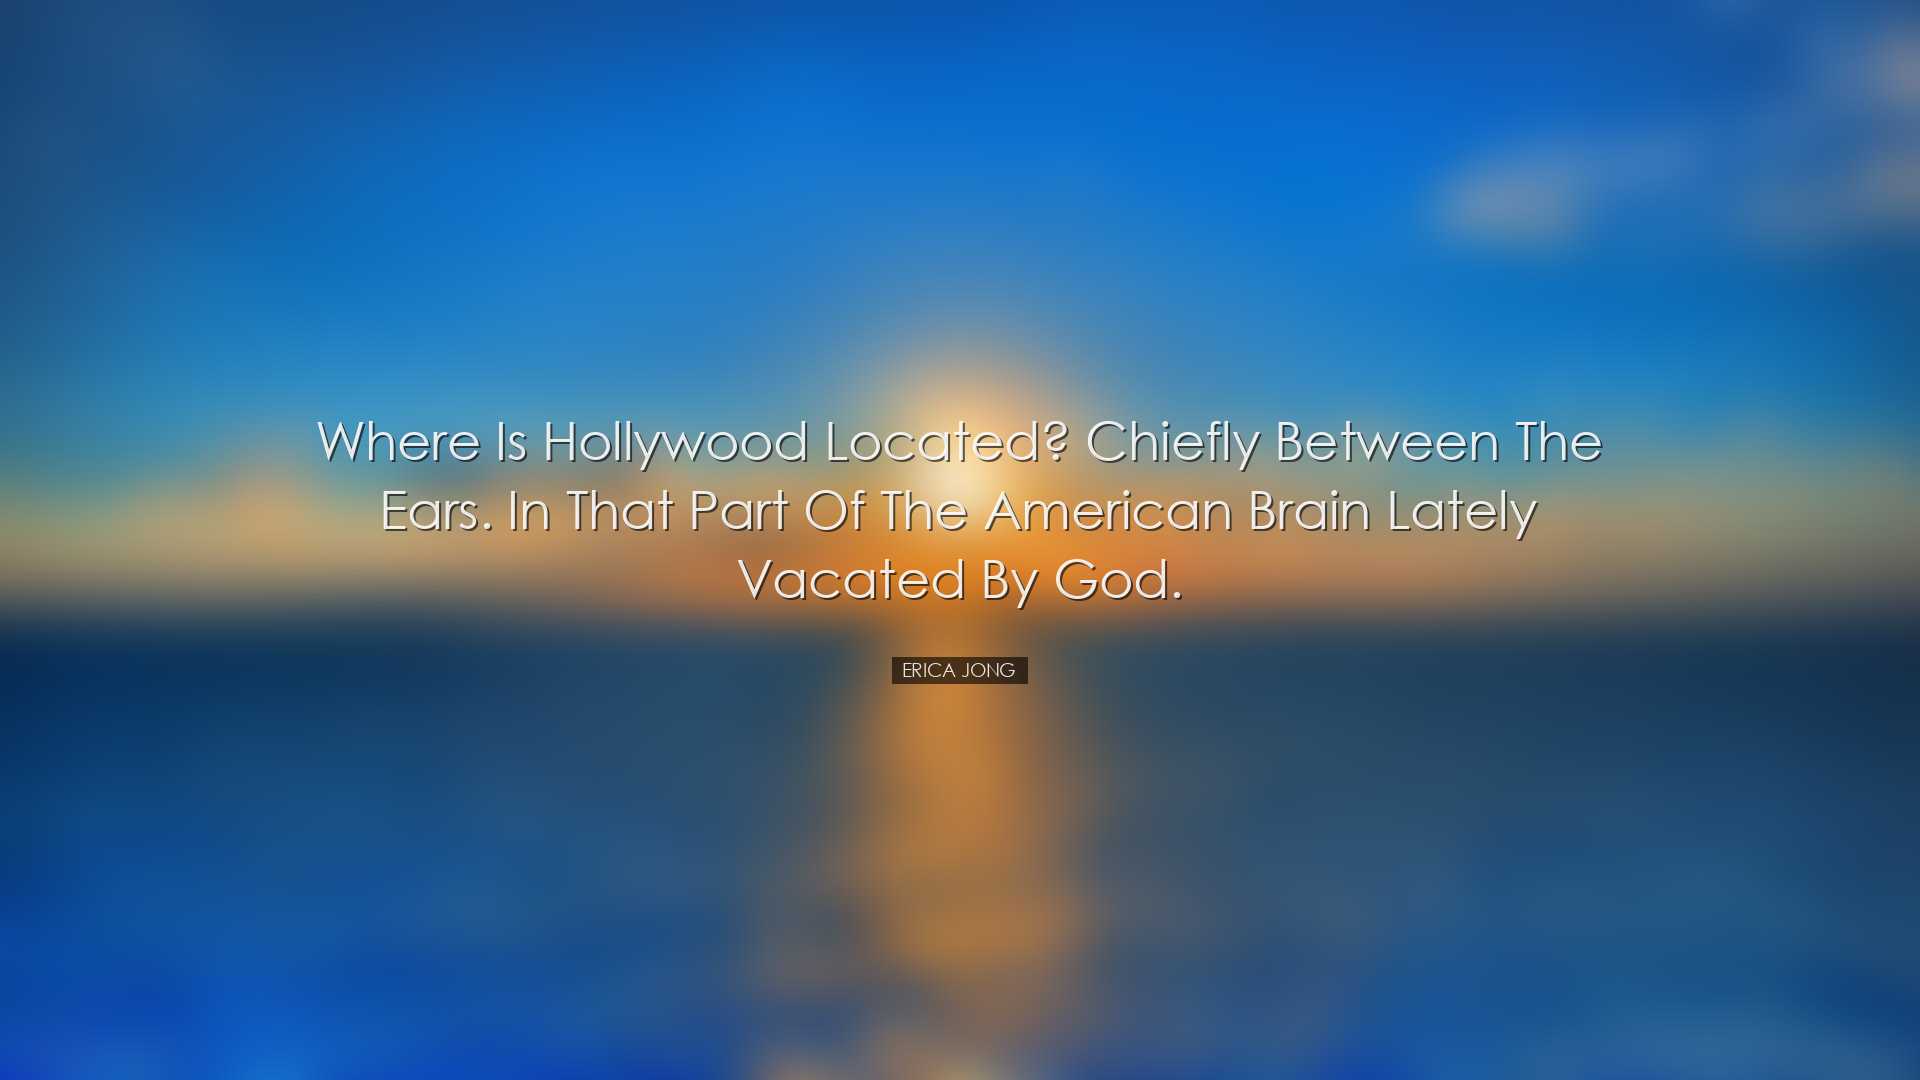 Where is Hollywood located? Chiefly between the ears. In that part